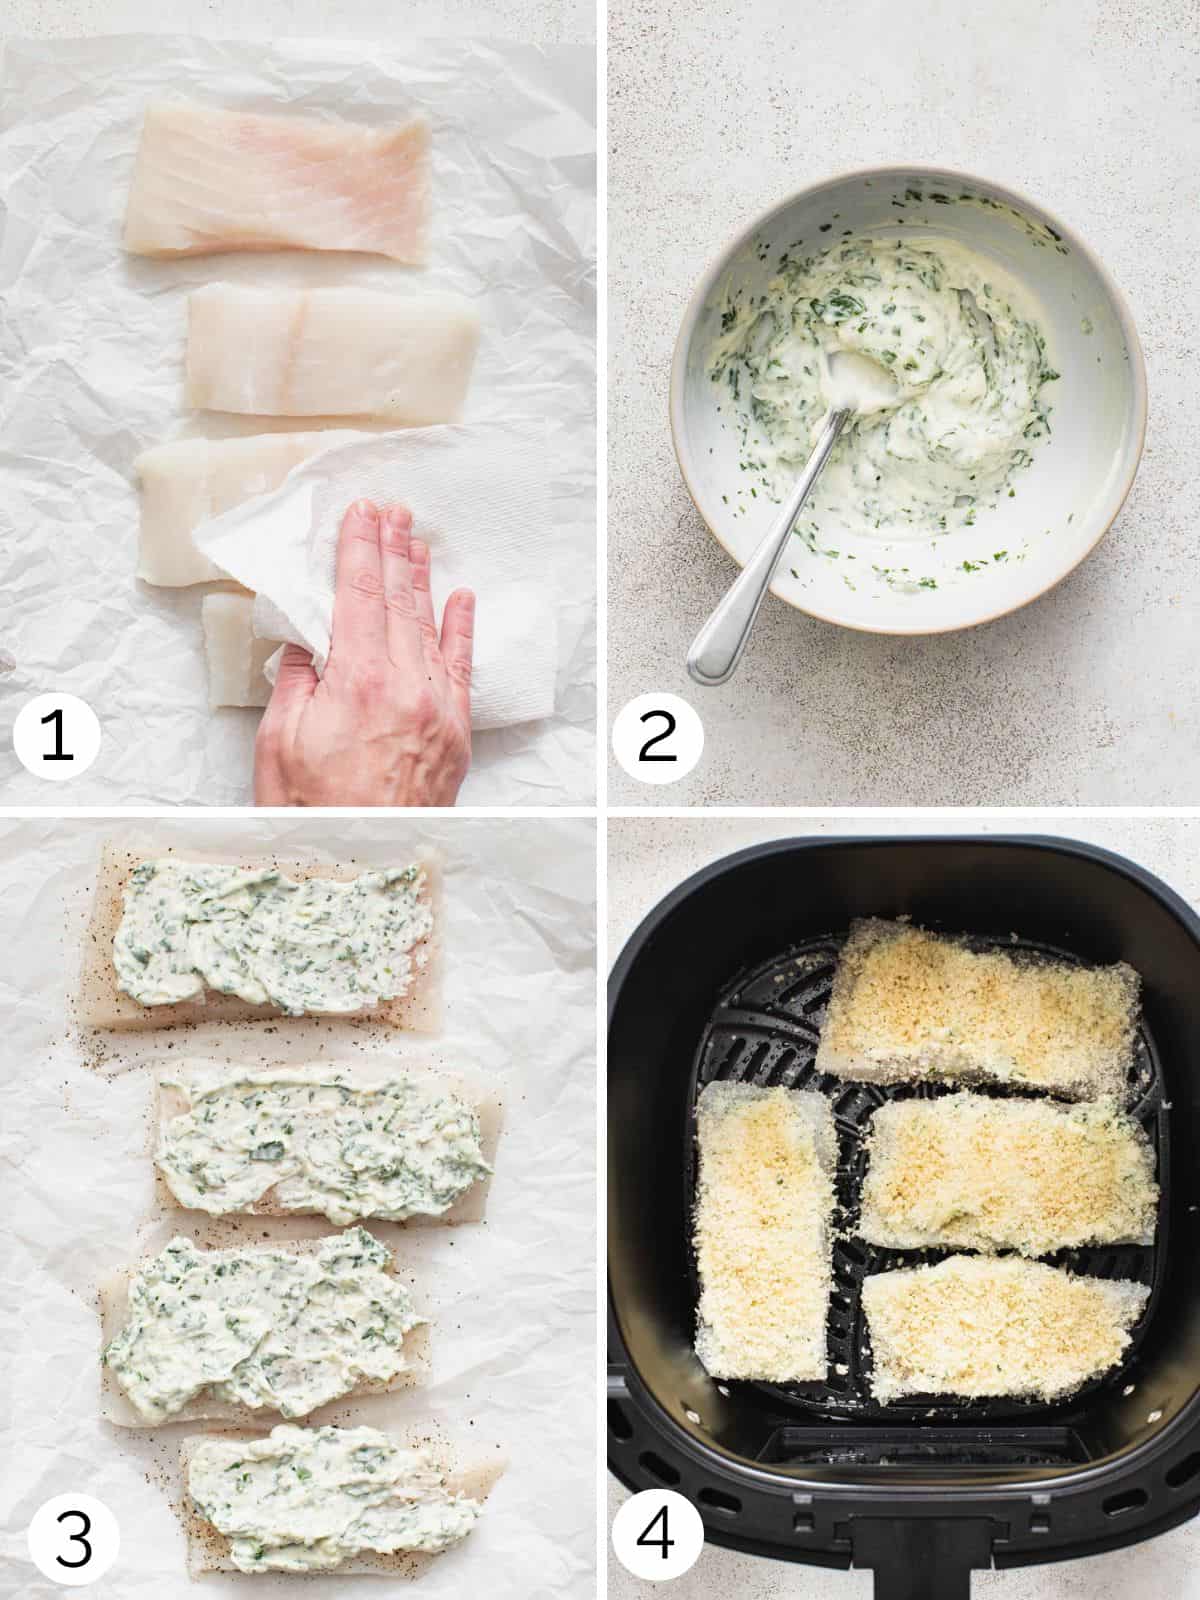 Process for how to dry halibut, top with panko, and cook it in the air fryer.